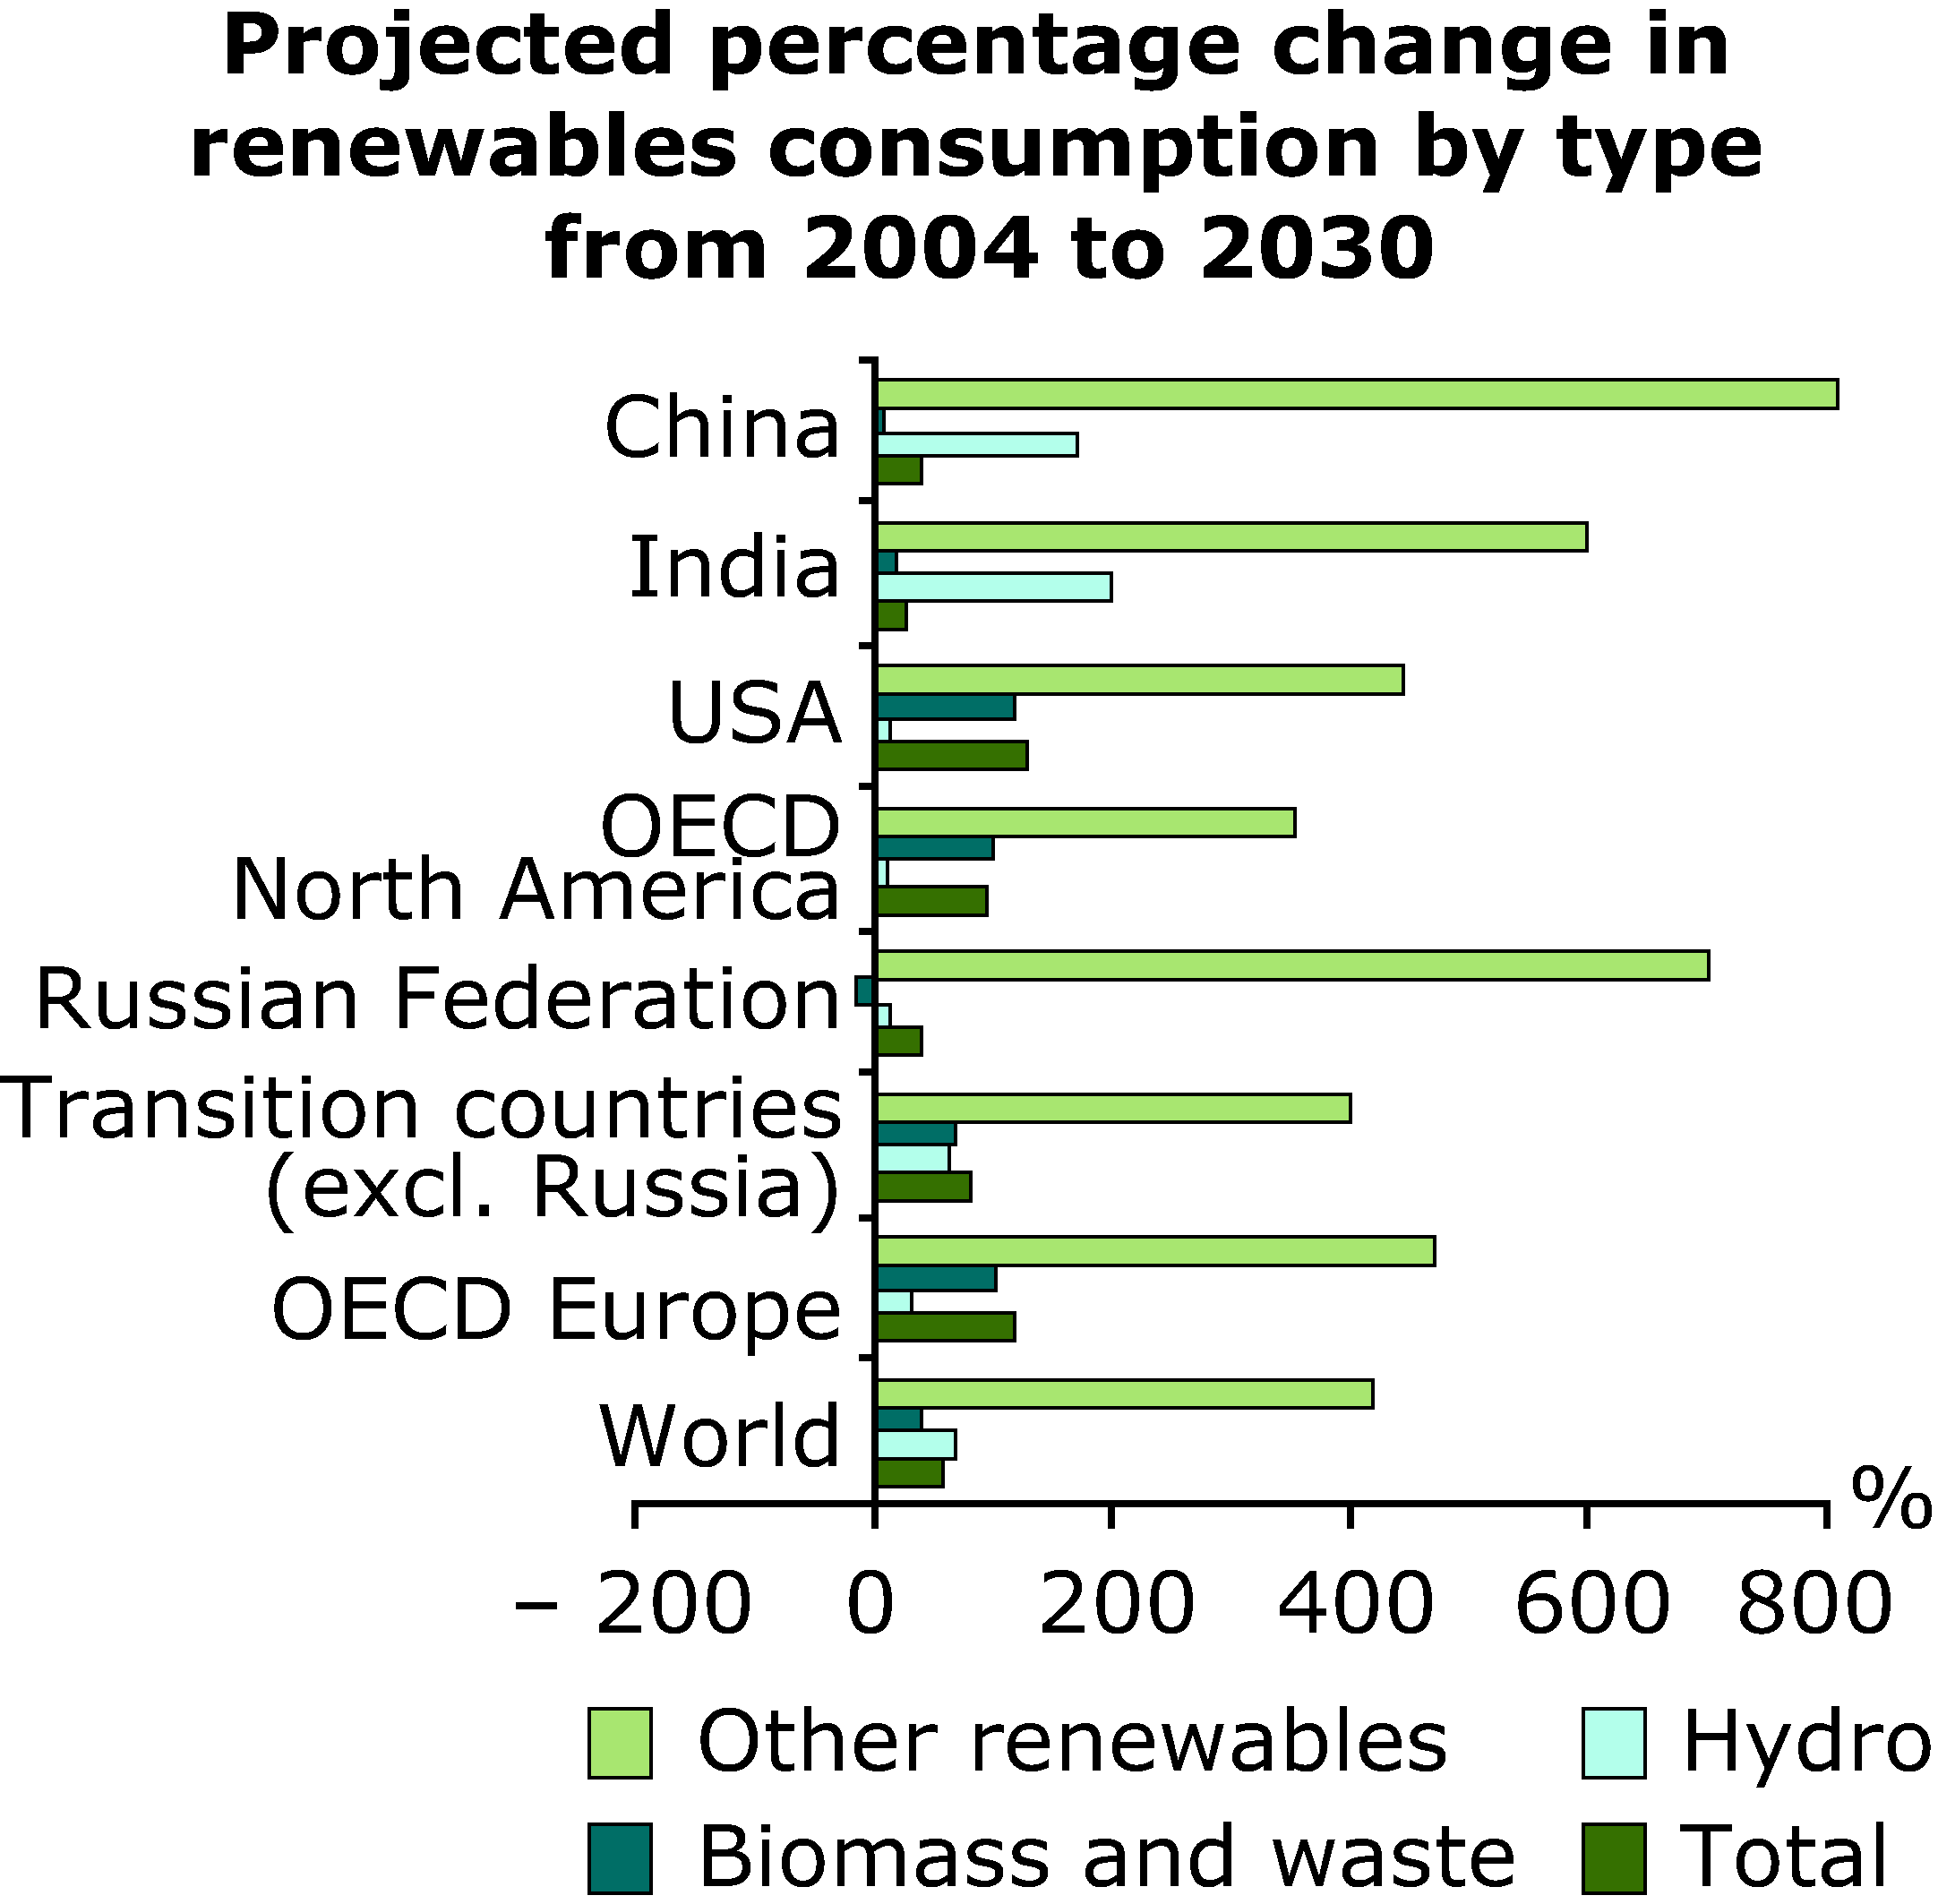 Projected percentage change in renewables consumption by type from 2004 to 2030